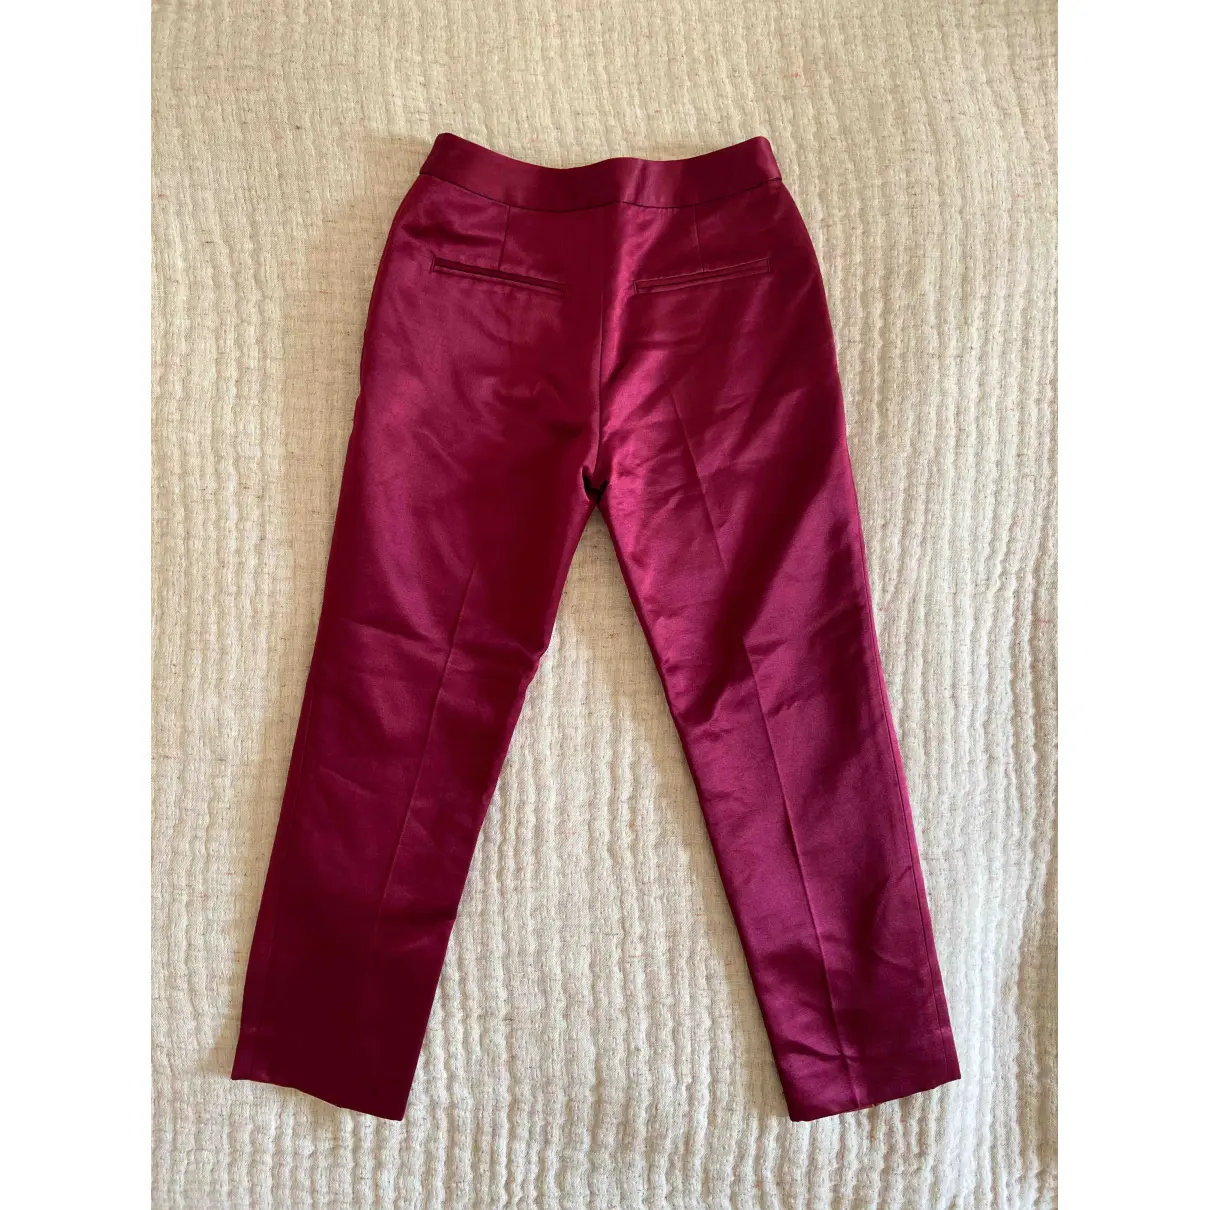 Buy Marc by Marc Jacobs Silk straight pants online